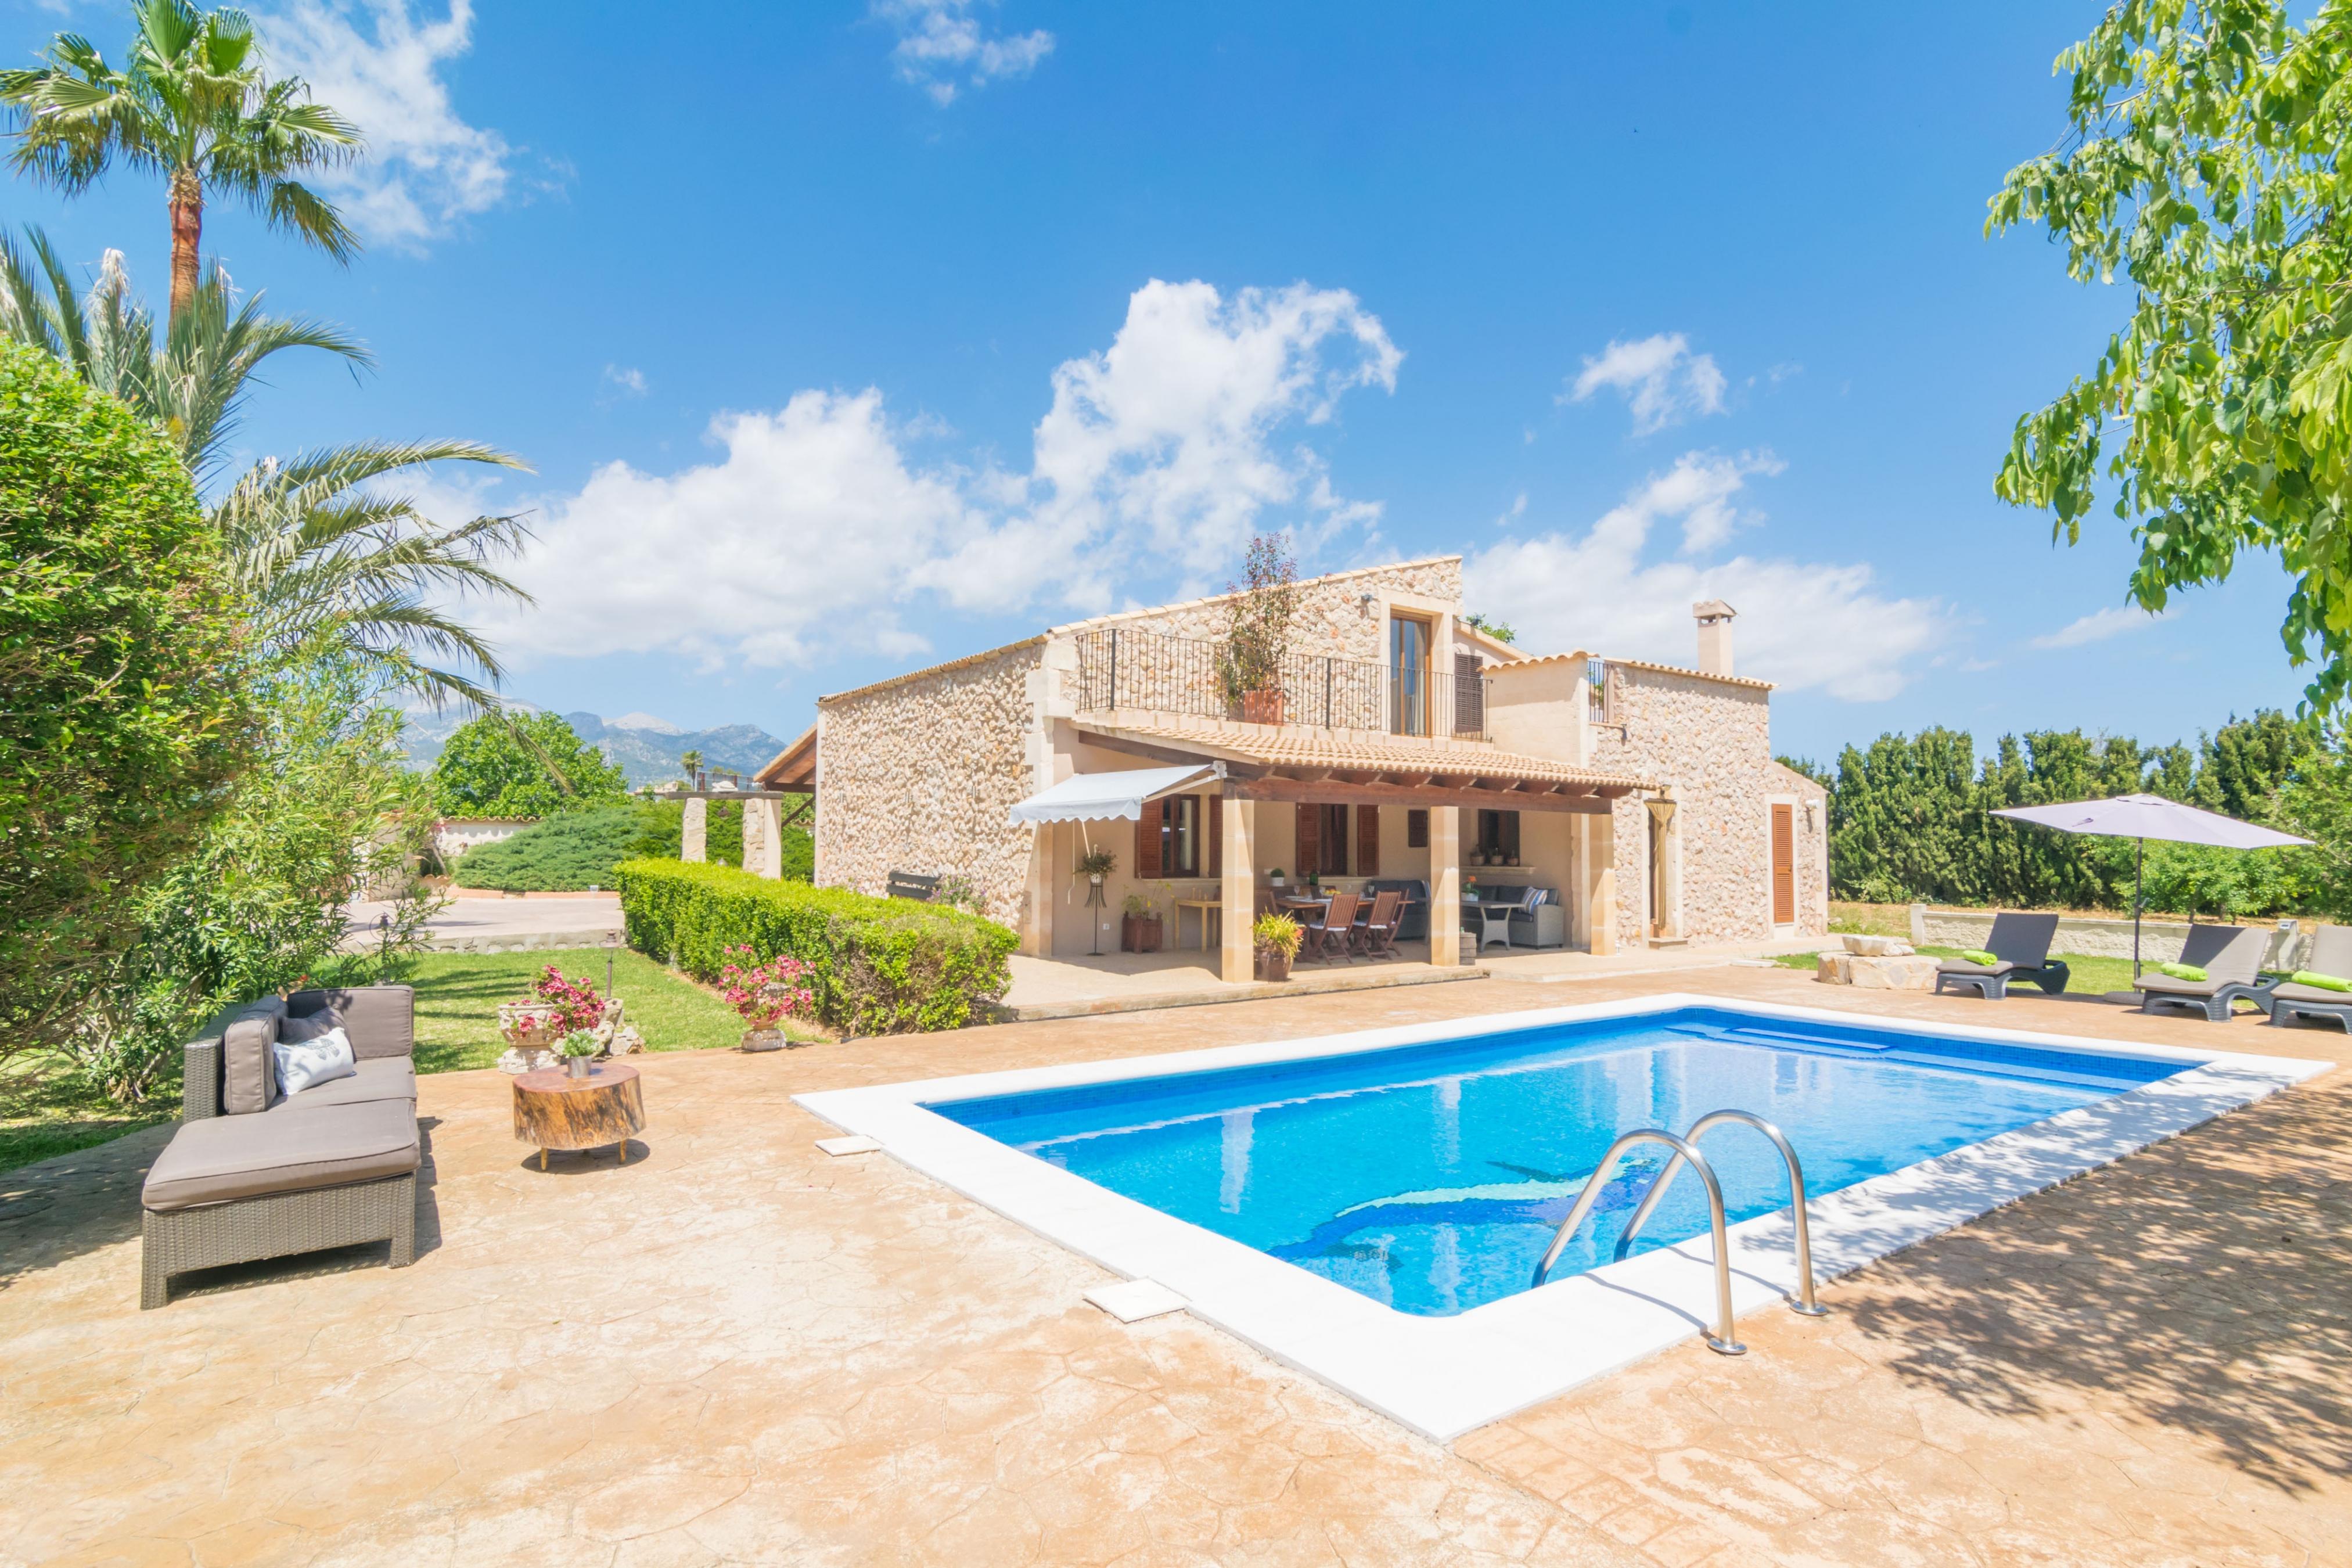 Property Image 1 - FINCA MIRALLES - Villa with private pool in Búger. Free WiFi